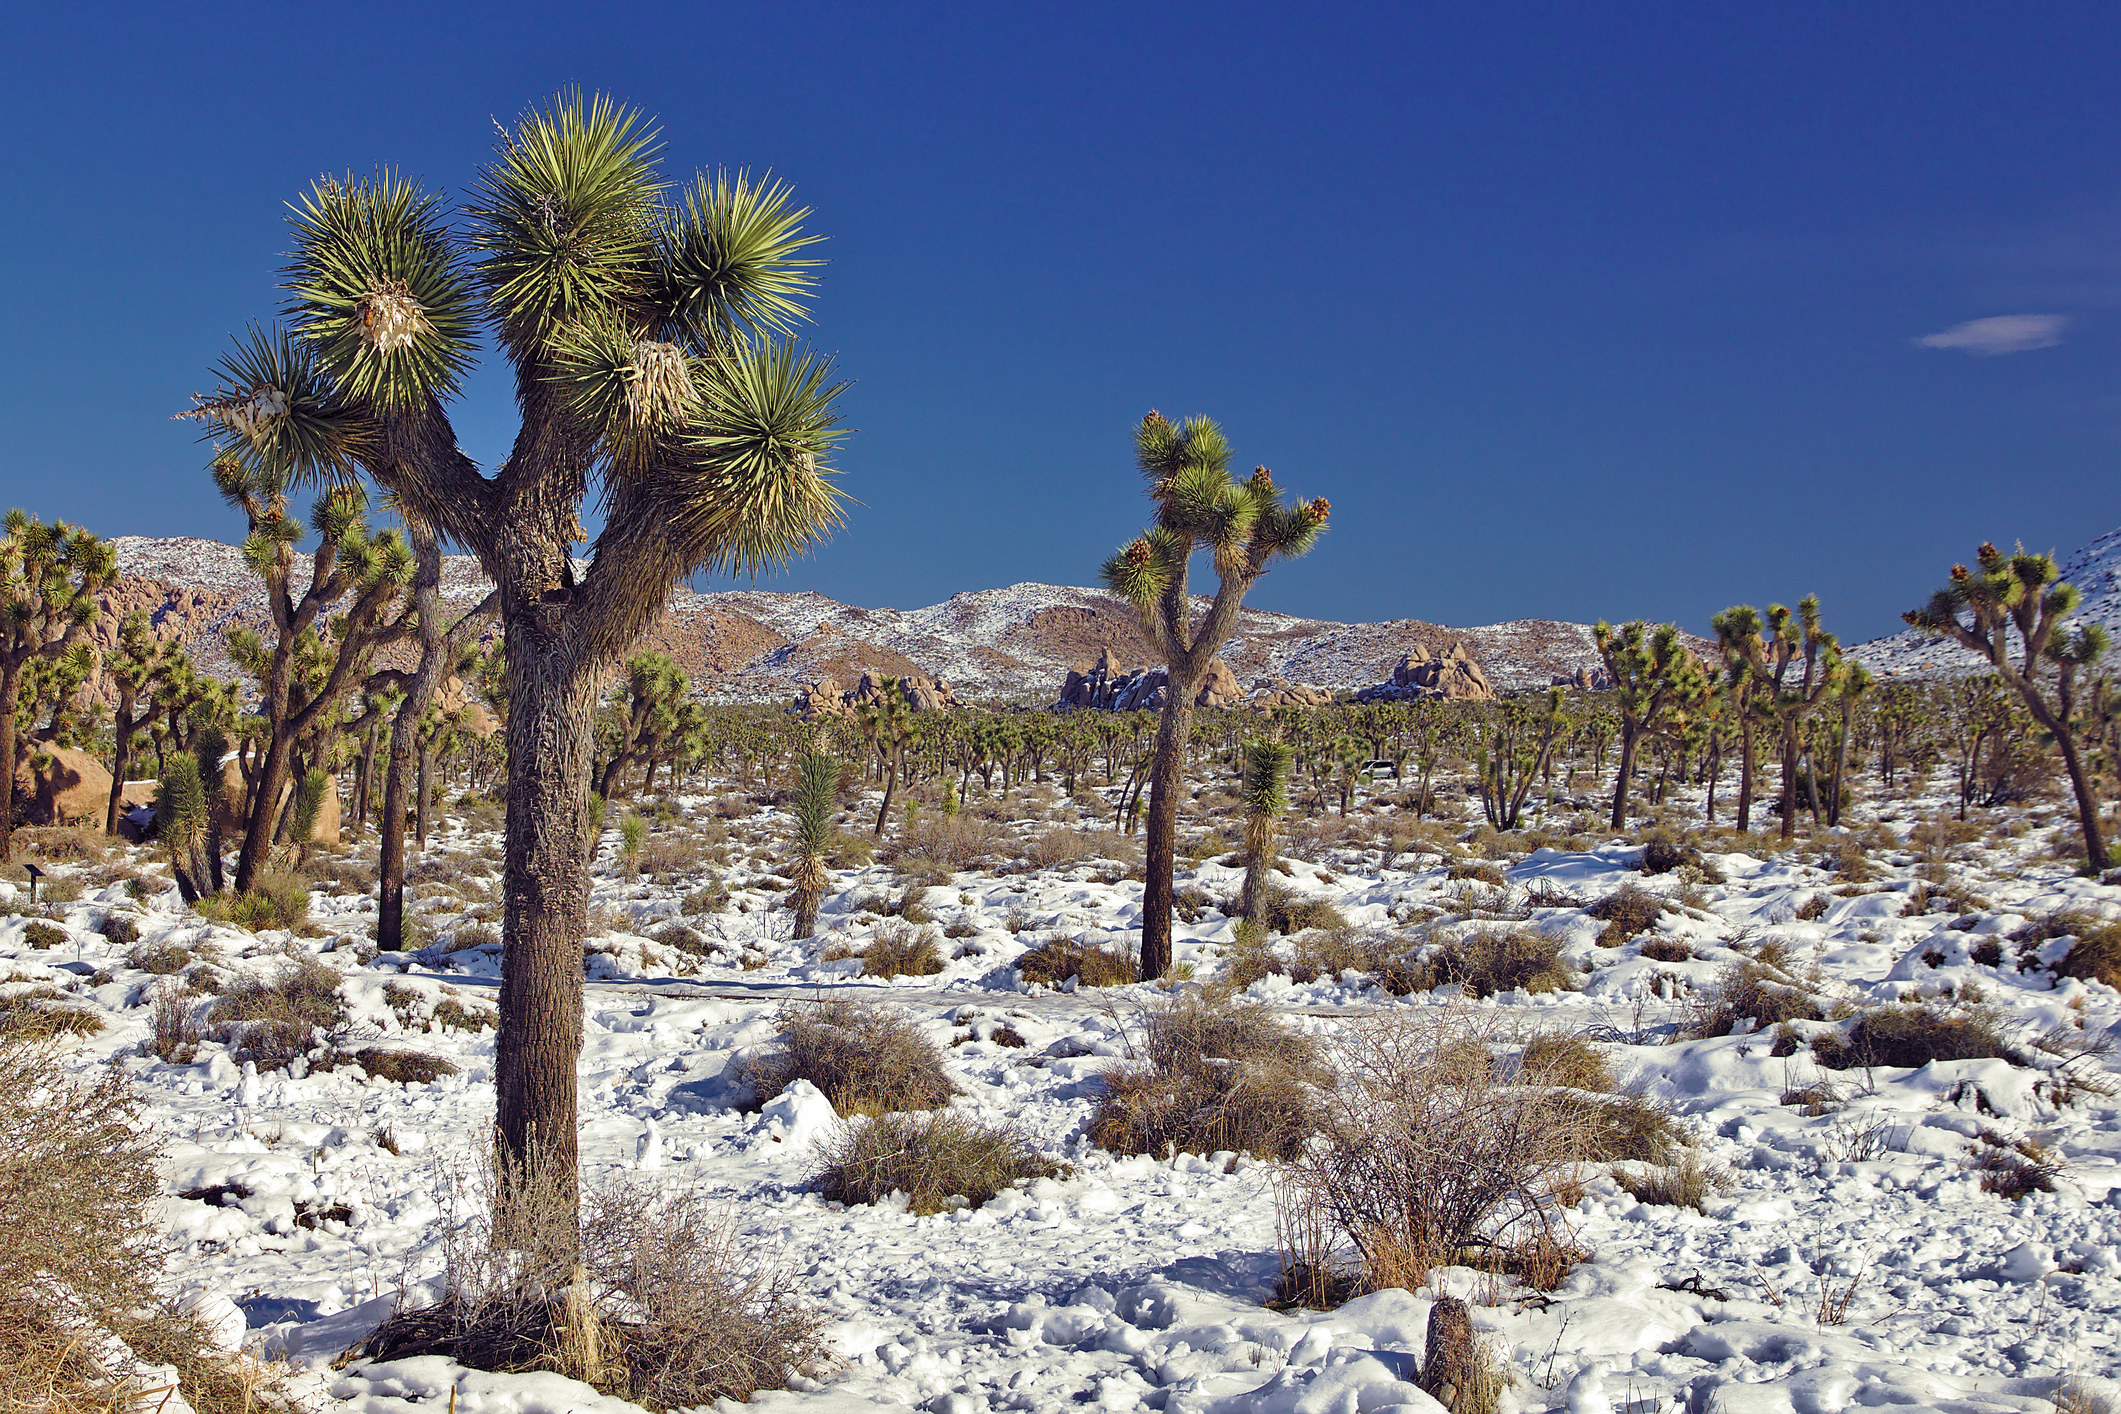 Spiky Joshua trees in the desert surrounded by snow and blue skies above